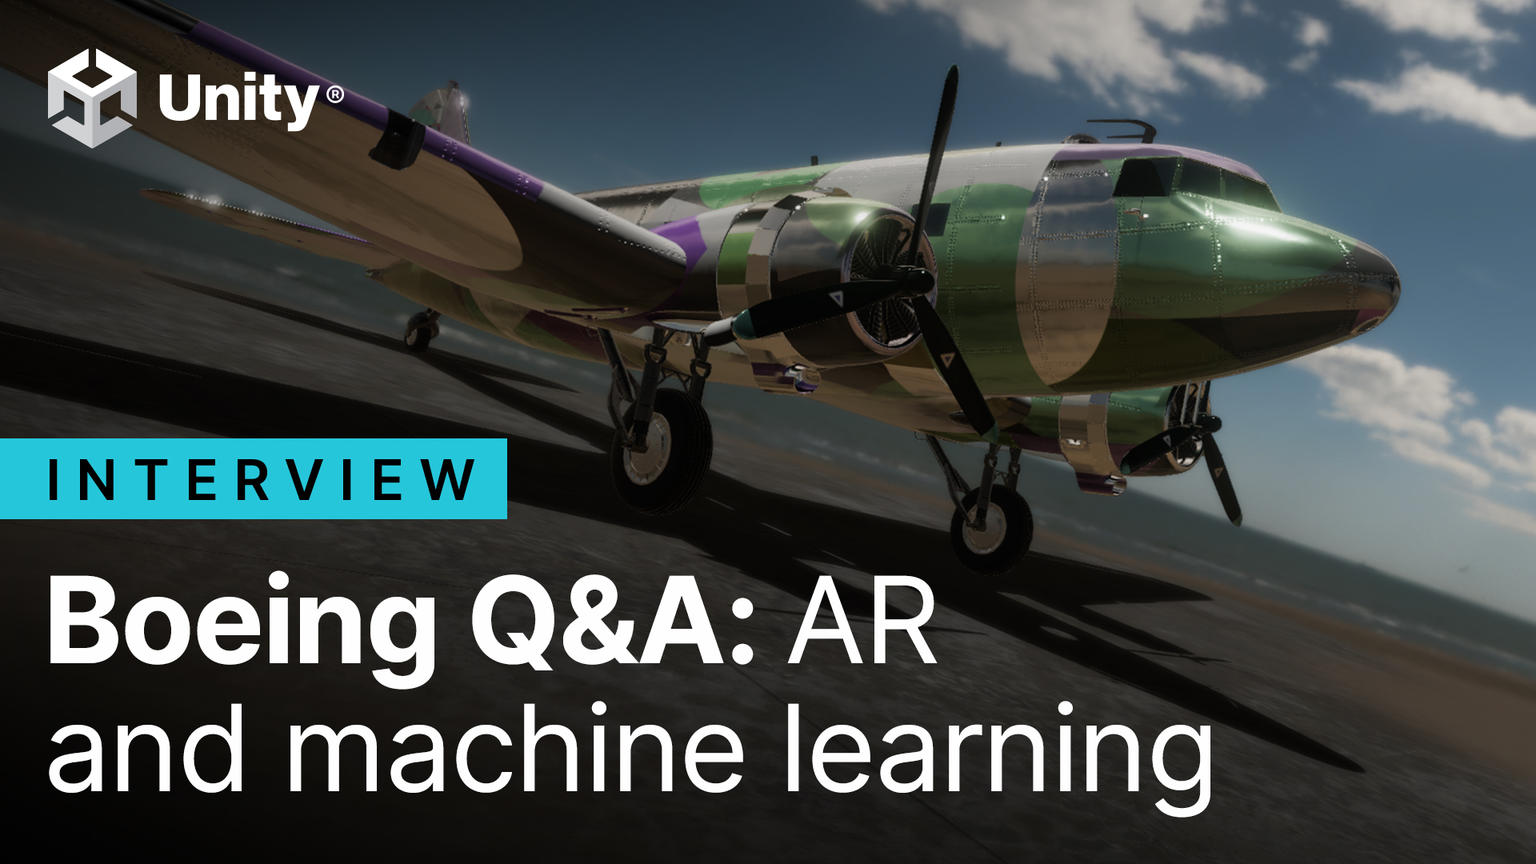 Boeing Q&A: AR and machine learning video thumbnail